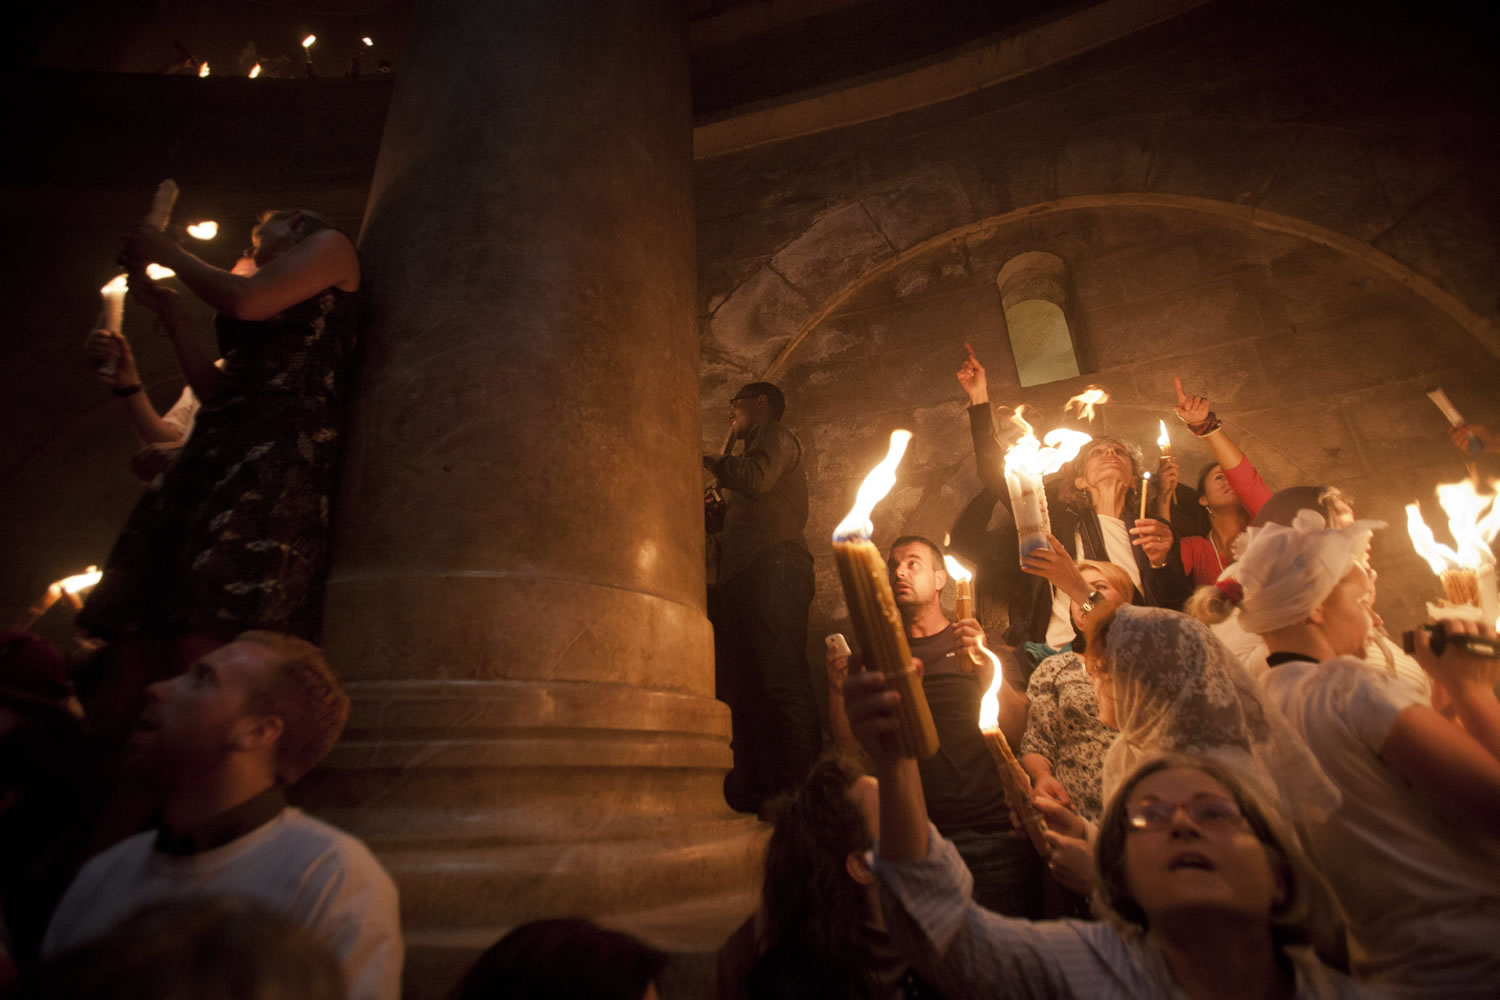 Christian pilgrims hold candles at the church of the Holy Sepulcher, traditionally believed to be the burial site of Jesus Christ, on Saturday during the ceremony of the Holy Fire in Jerusalem's Old City.